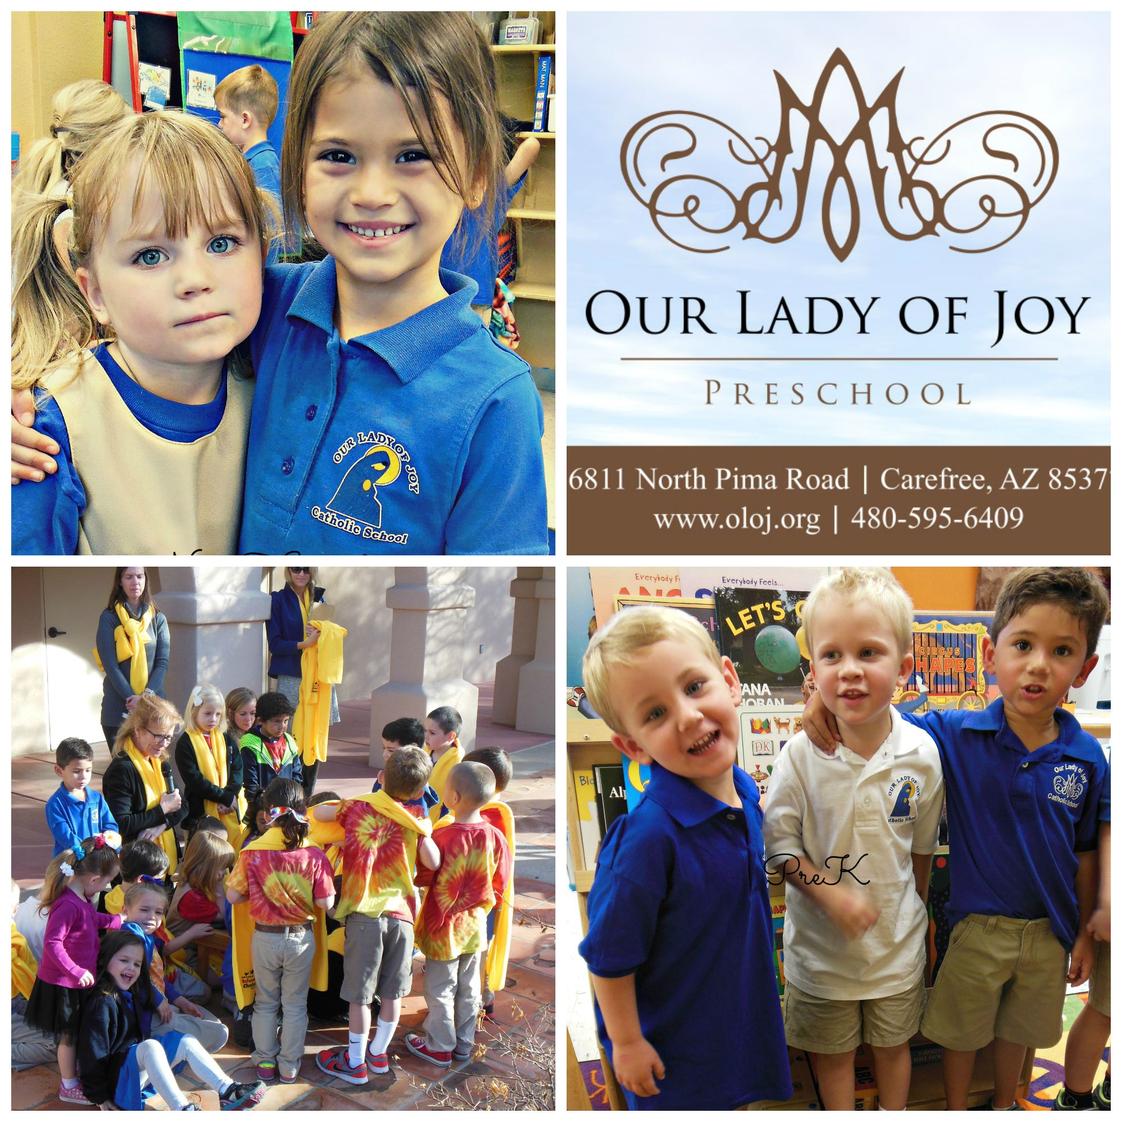 Our Lady Of Joy Photo #1 - Our Lady of Joy Catholic Preschool is a faith filled school community driven by academic excellence. We are regarded as the top preschool in the North Valley area.